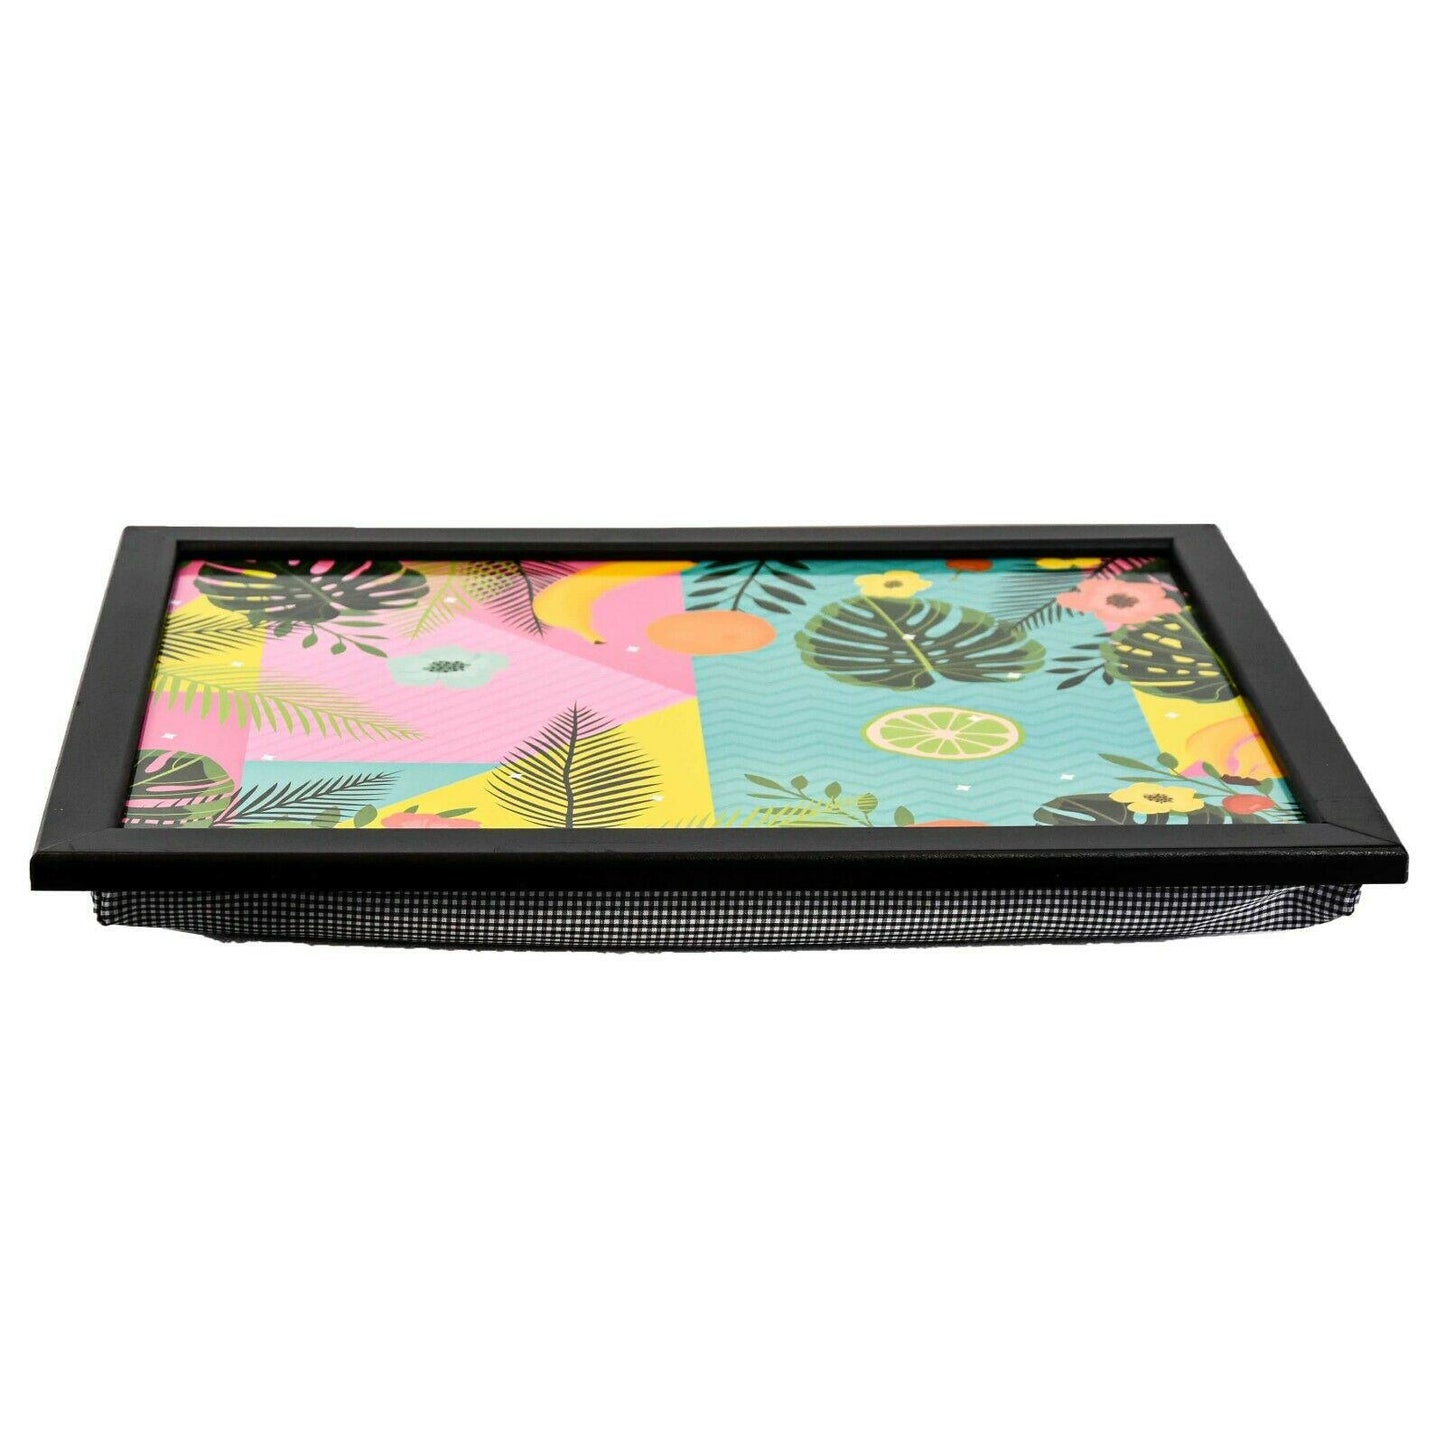 Tropical Fruit Lap Tray With Bean Bag Cushion by Geezy - UKBuyZone